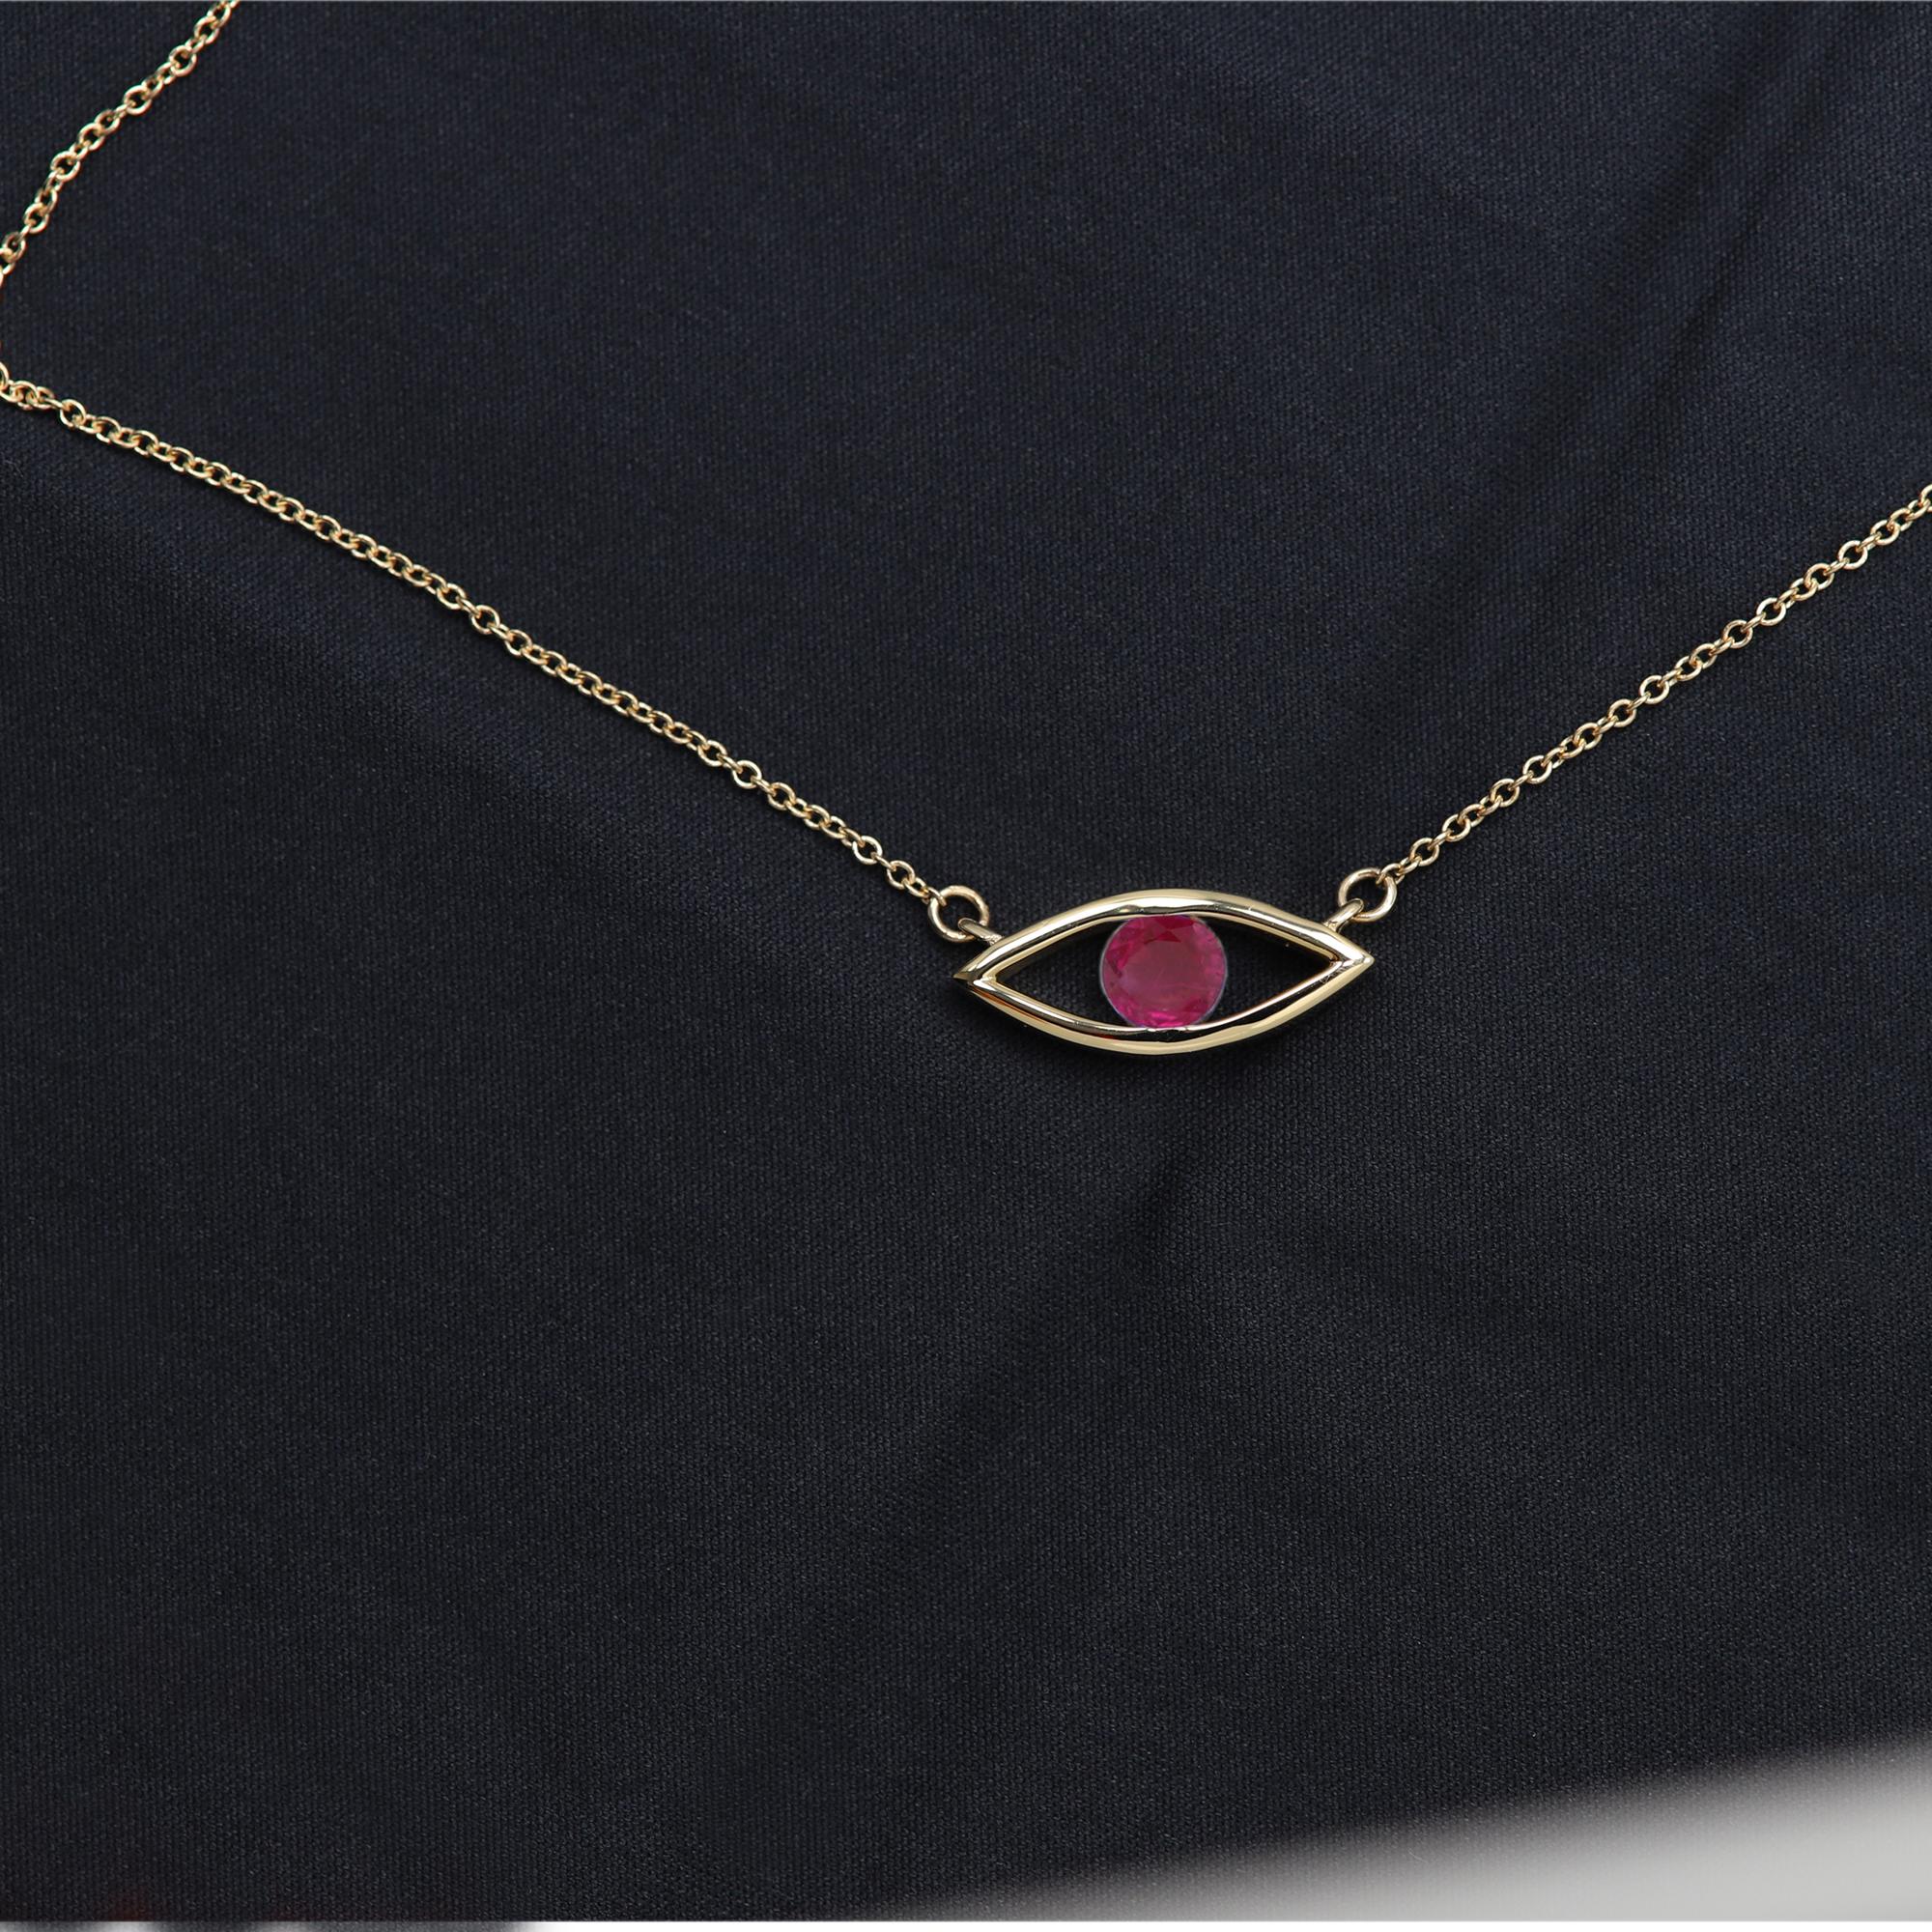 Evil Eye Necklace 14 Karat Gold Ruby Red Birthstone 0.50 Carat In New Condition For Sale In Brooklyn, NY